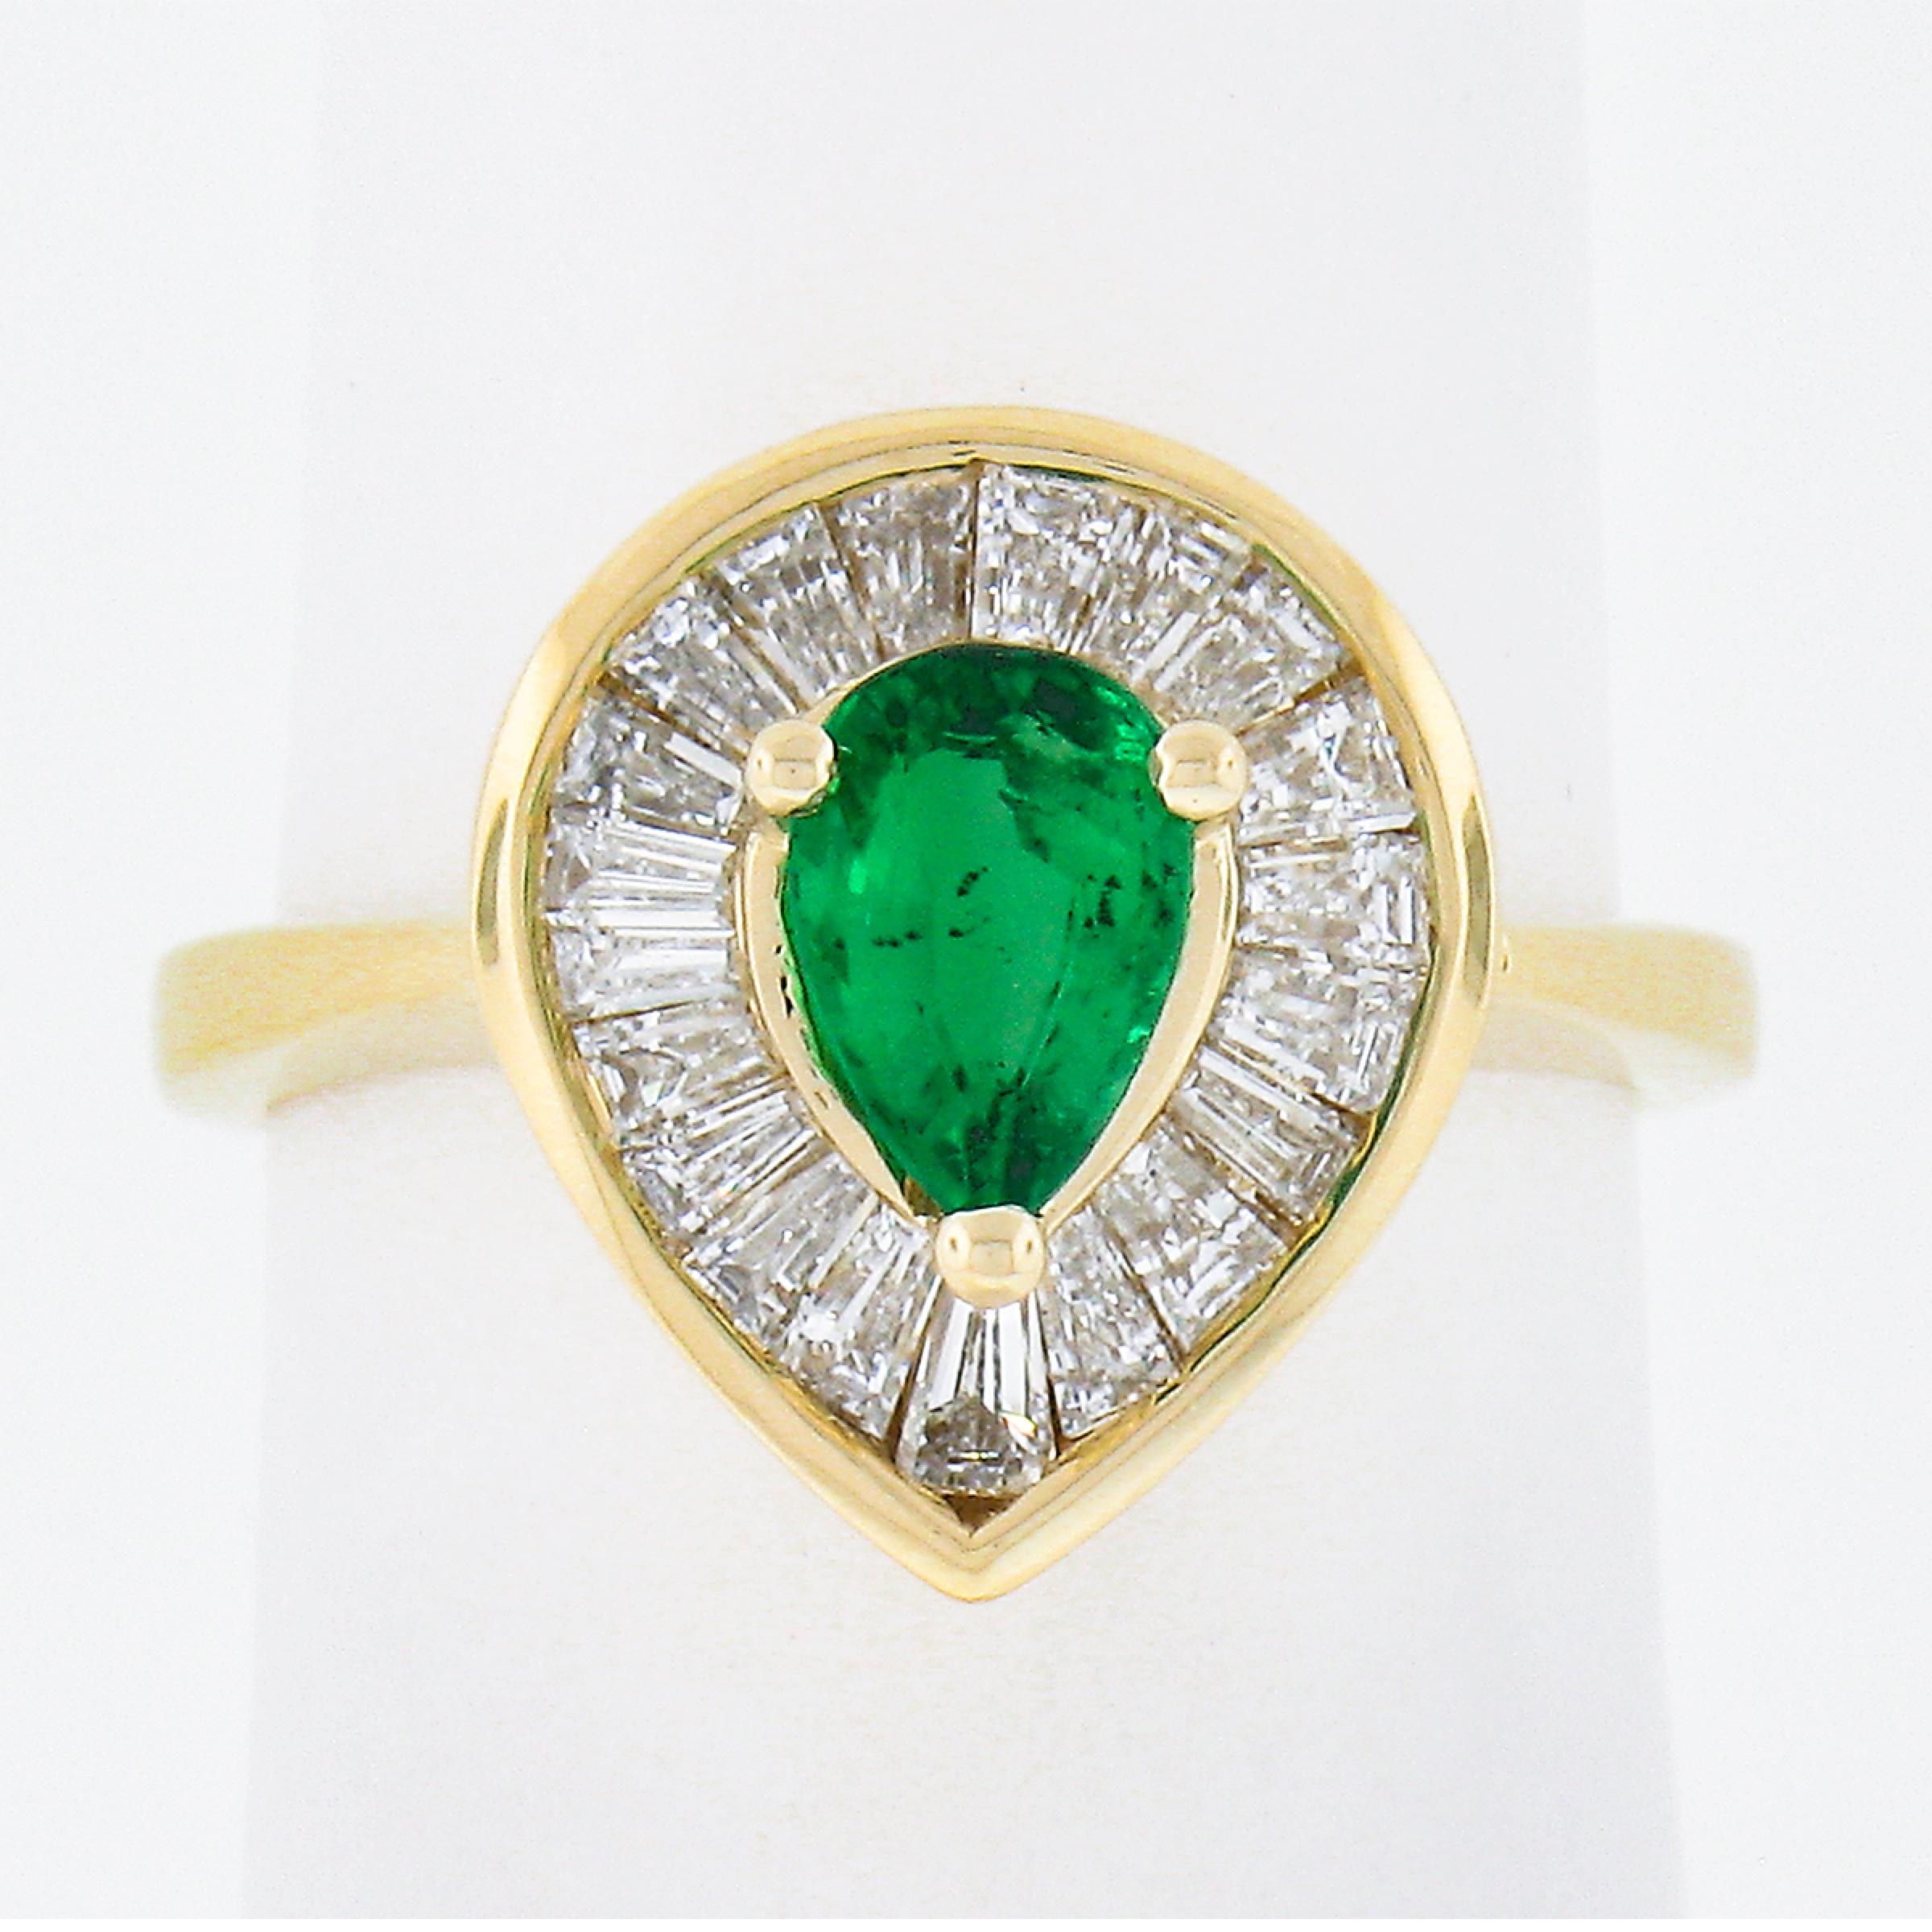 This is an absolutely beautiful ballerina ring that is crafted in solid 14k yellow gold featuring a gorgeous and high quality emerald solitaire surrounded by a fiery diamond halo. The prong set pear cut emerald stone stands out with its very vivid